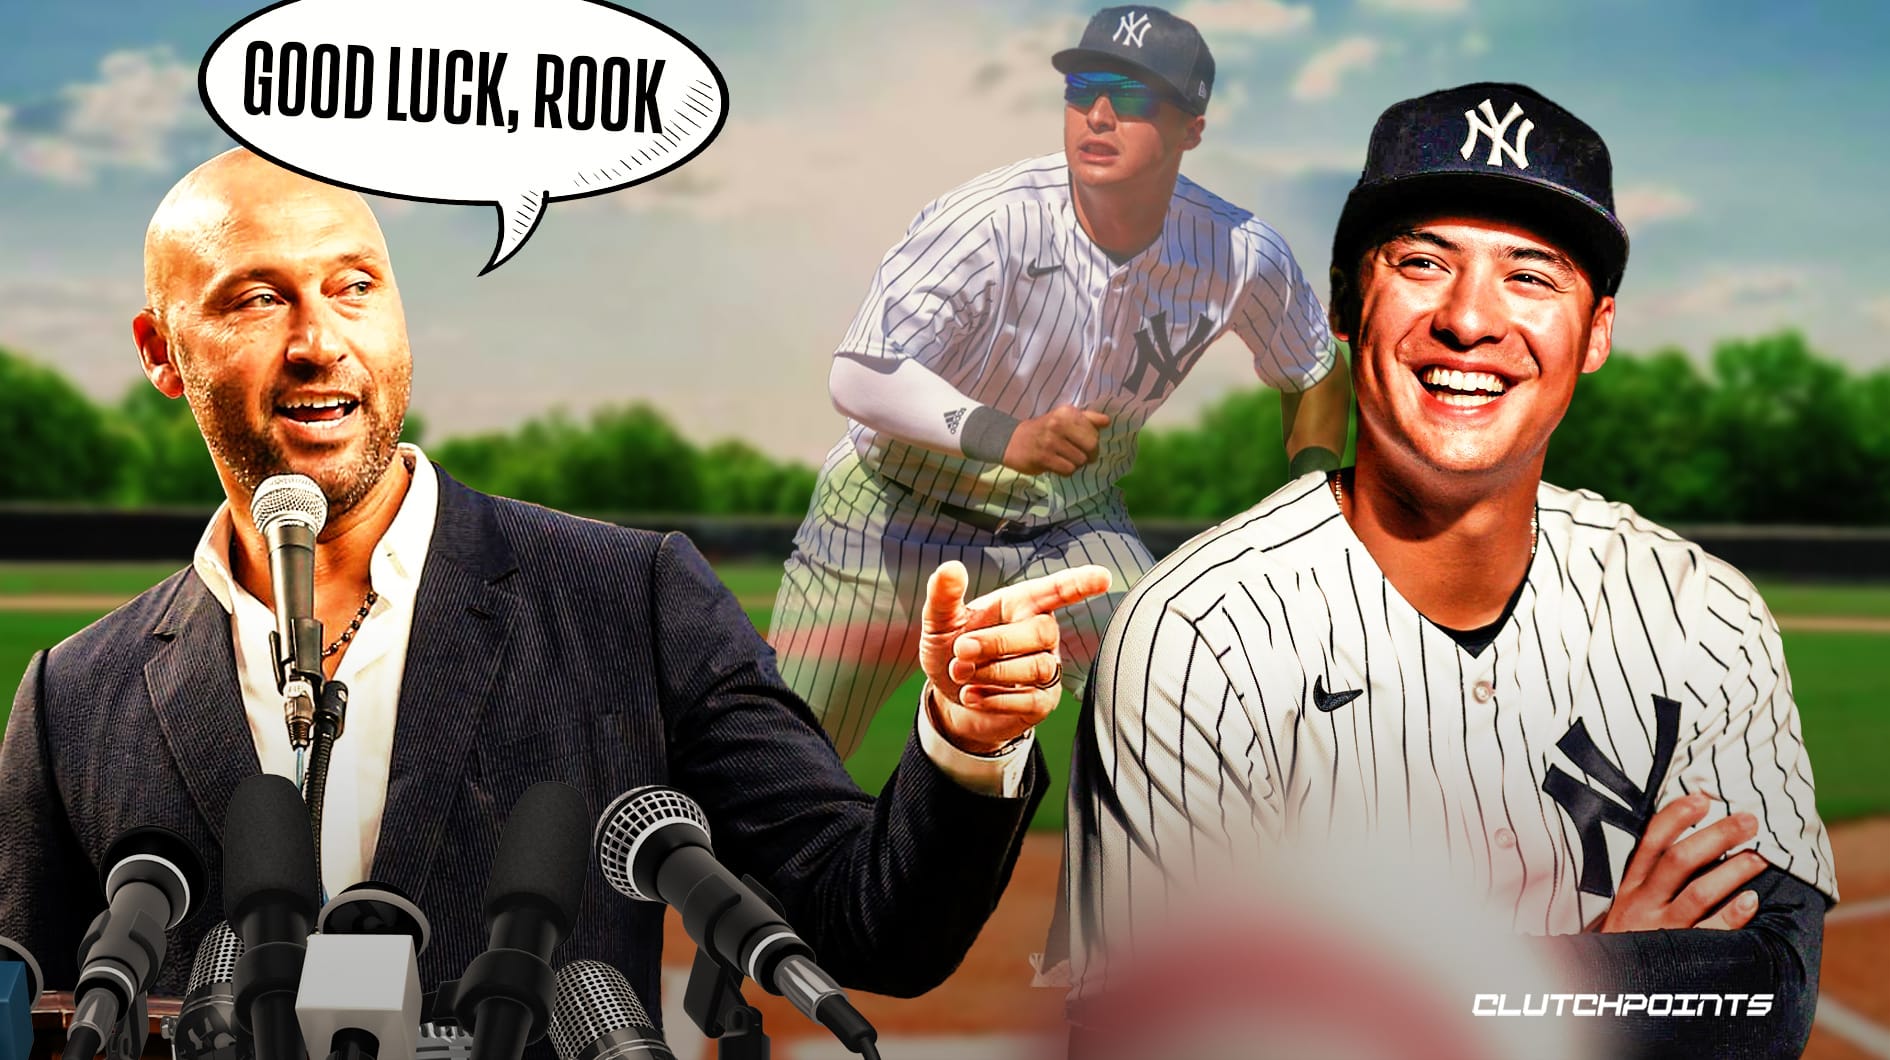 Derek Jeter shares his honest thoughts on Anthony Volpe's rookie